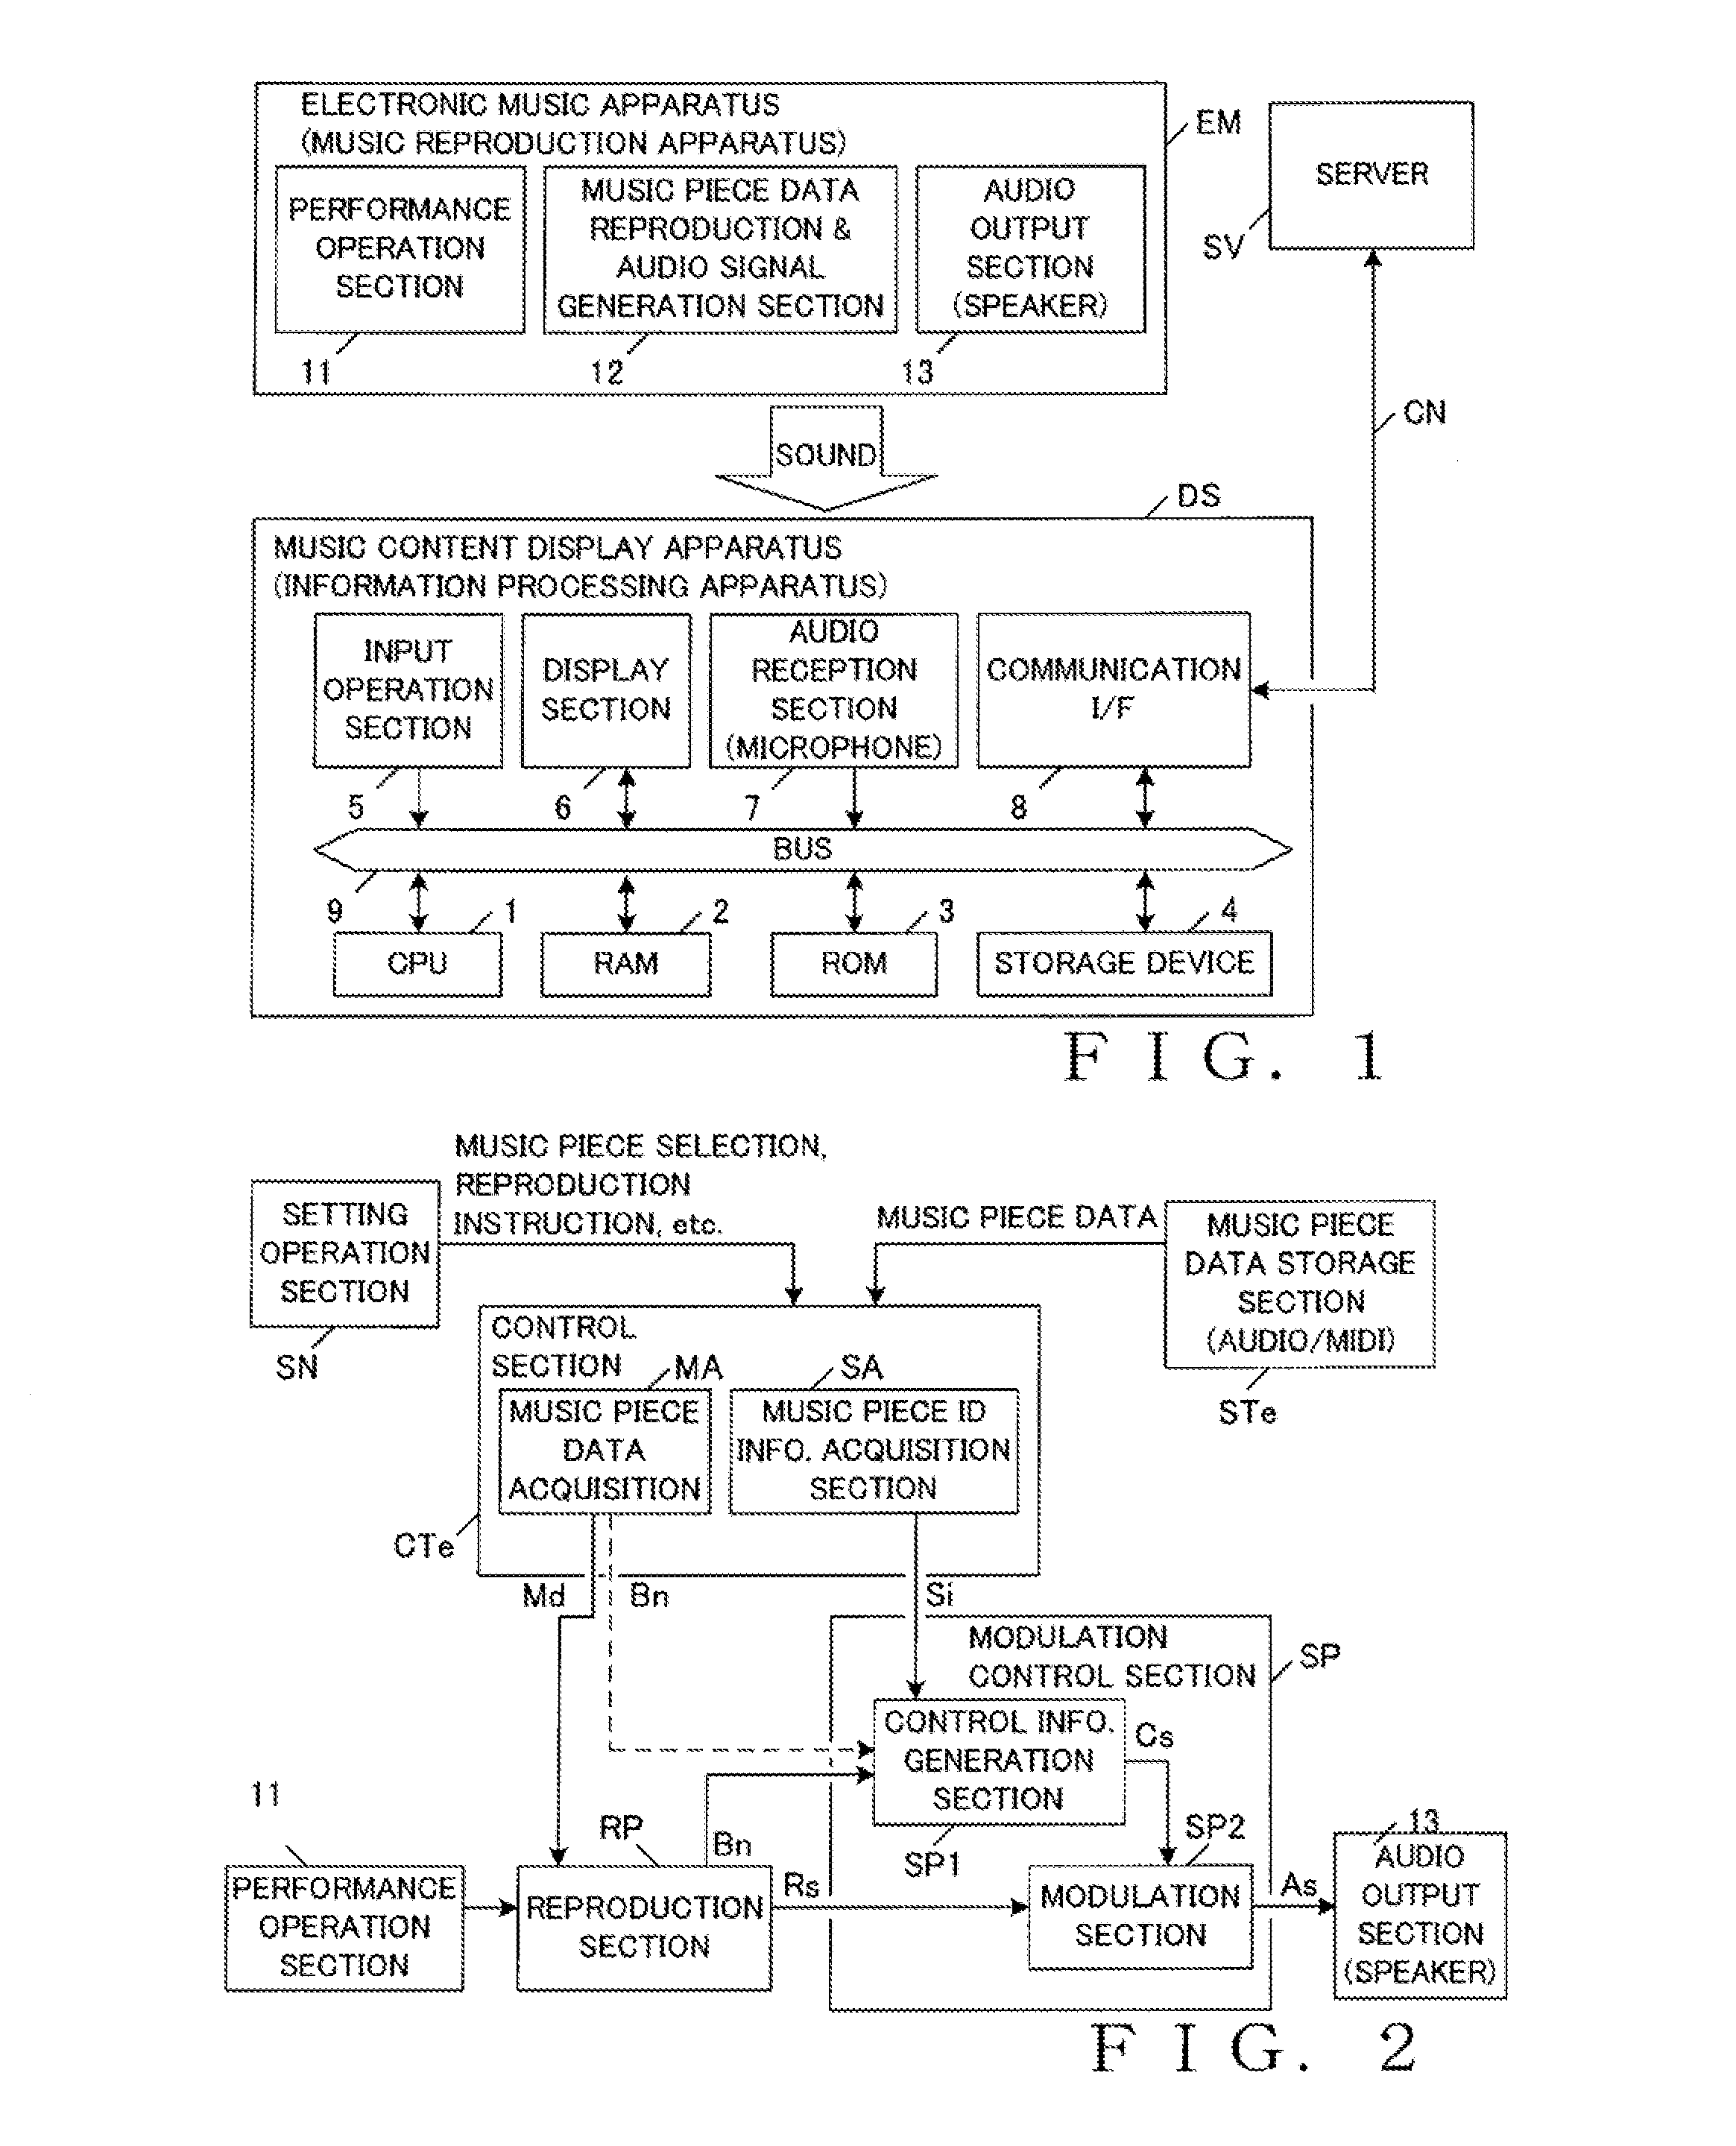 Displaying content in relation to music reproduction by means of information processing apparatus independent of music reproduction apparatus